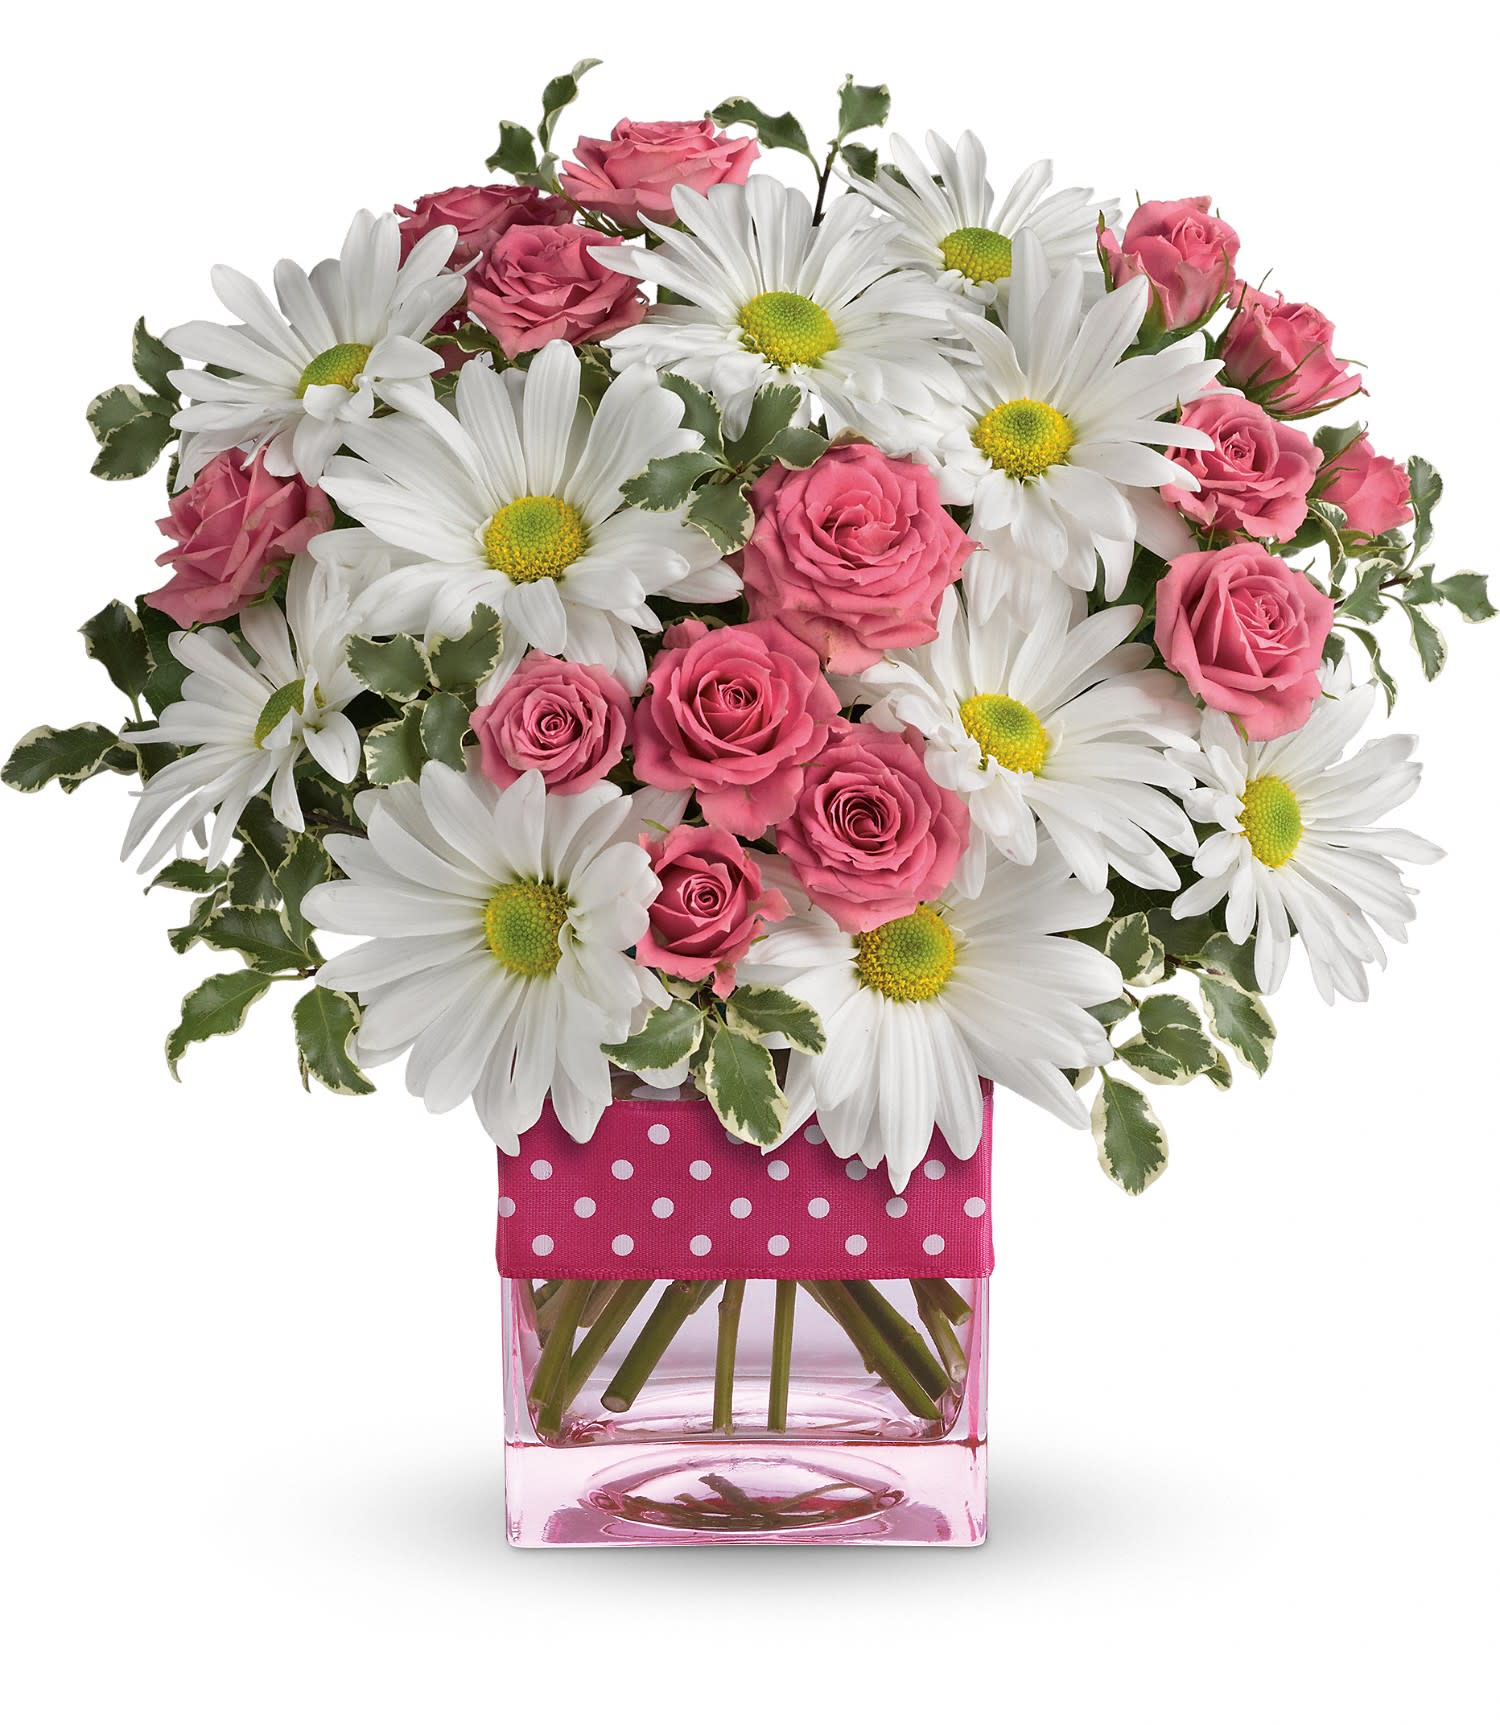 Teleflora's Polka Dots and Posies - Polka dots and posies, they're the perfect pair. Well, at least in this pretty arrangement they are. Just the right flowers in just the right vase all wrapped up inâ¦ you guessed it, just the right ribbon.